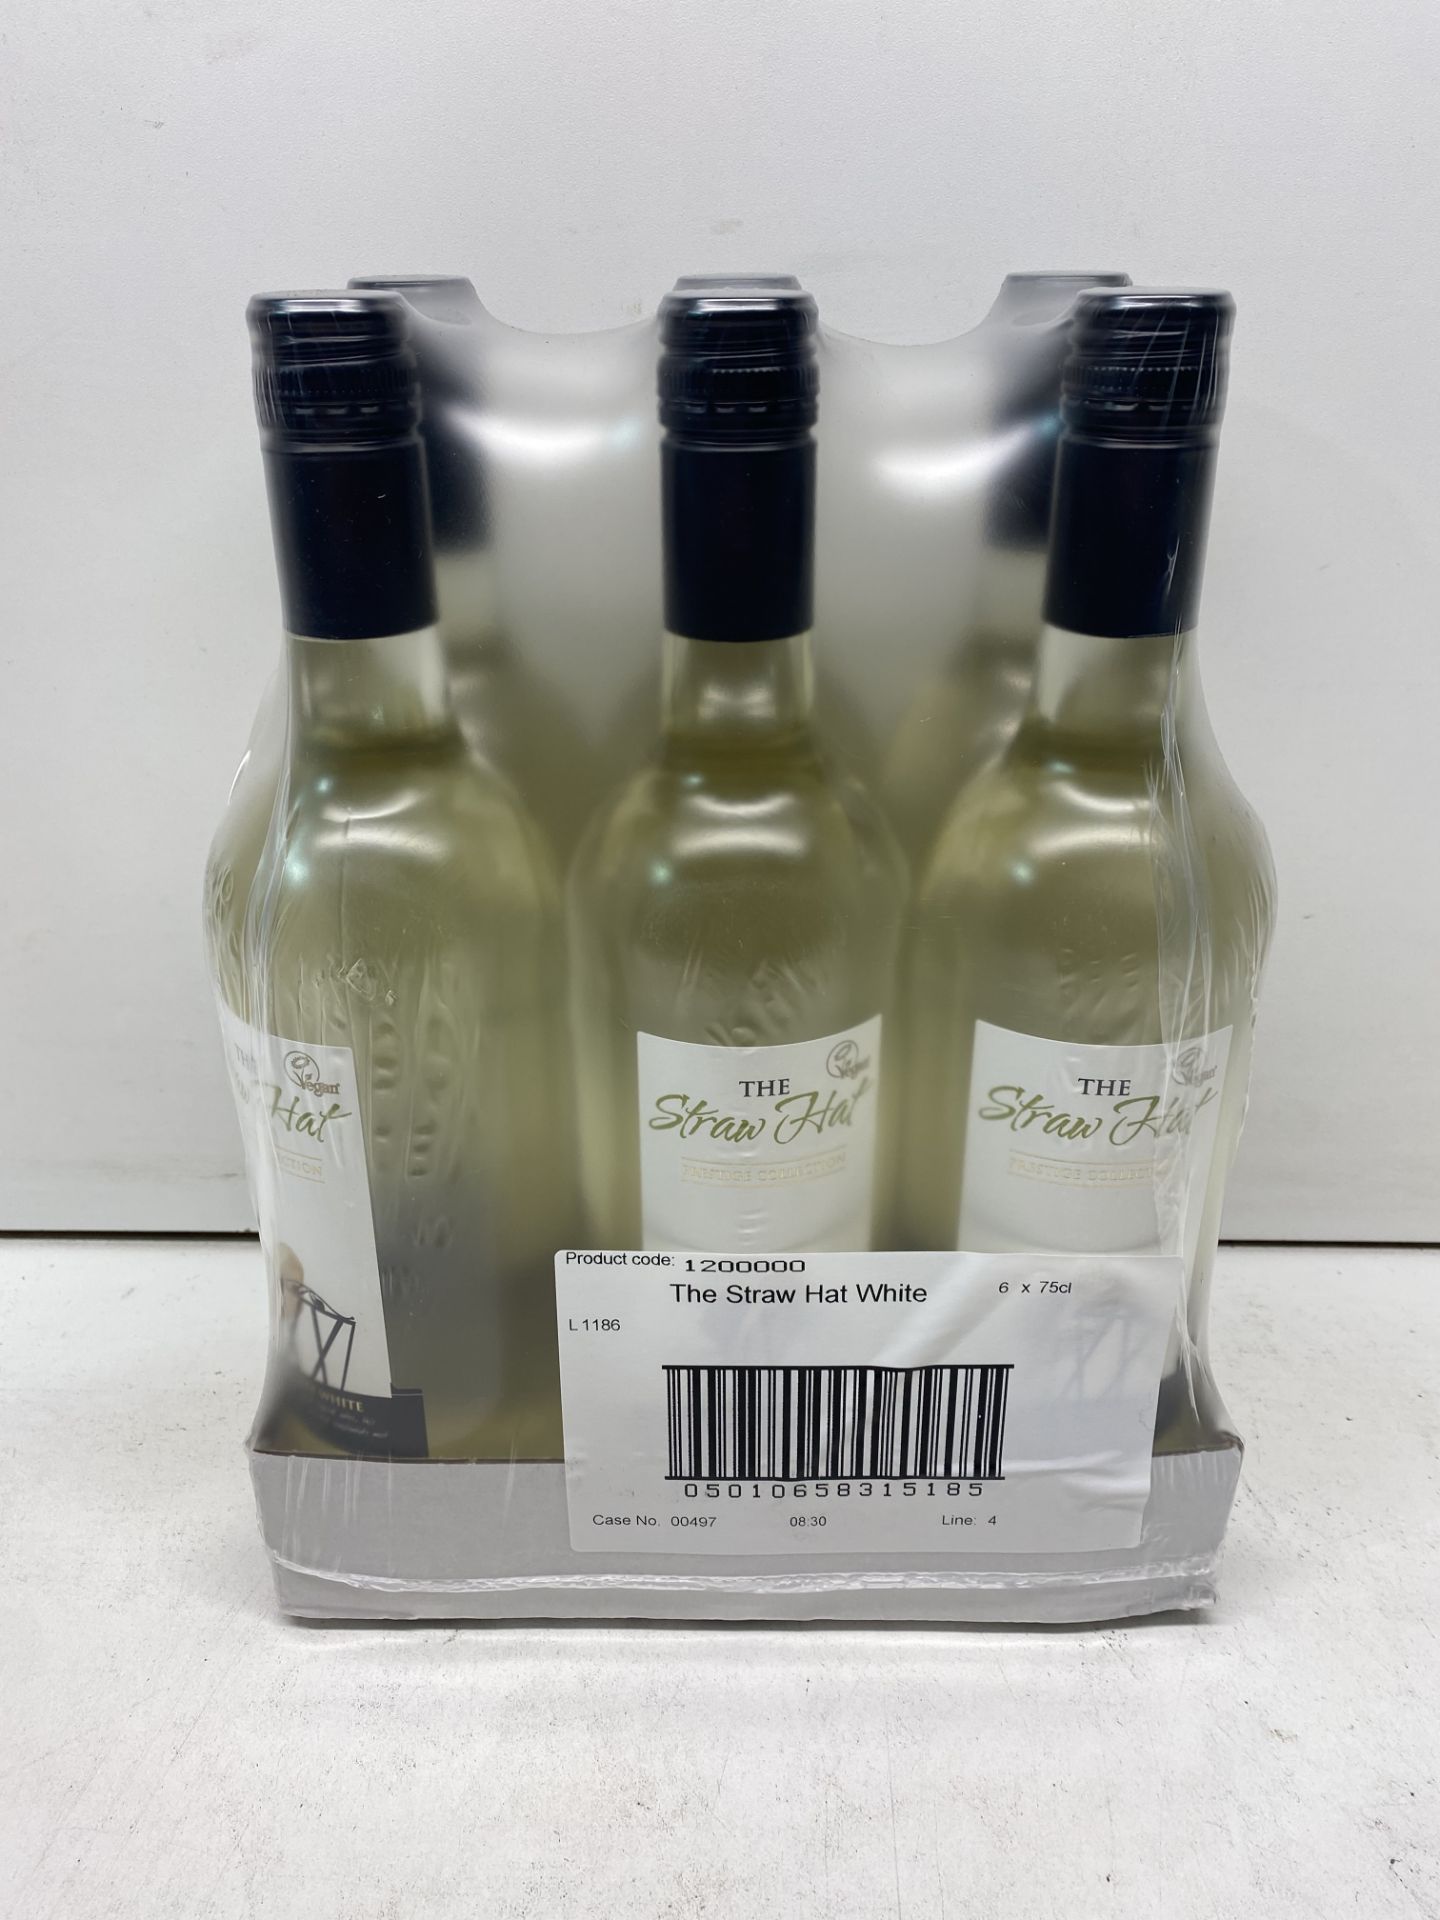 24 x Bottles Of The Straw Hat White Wine - Image 3 of 3